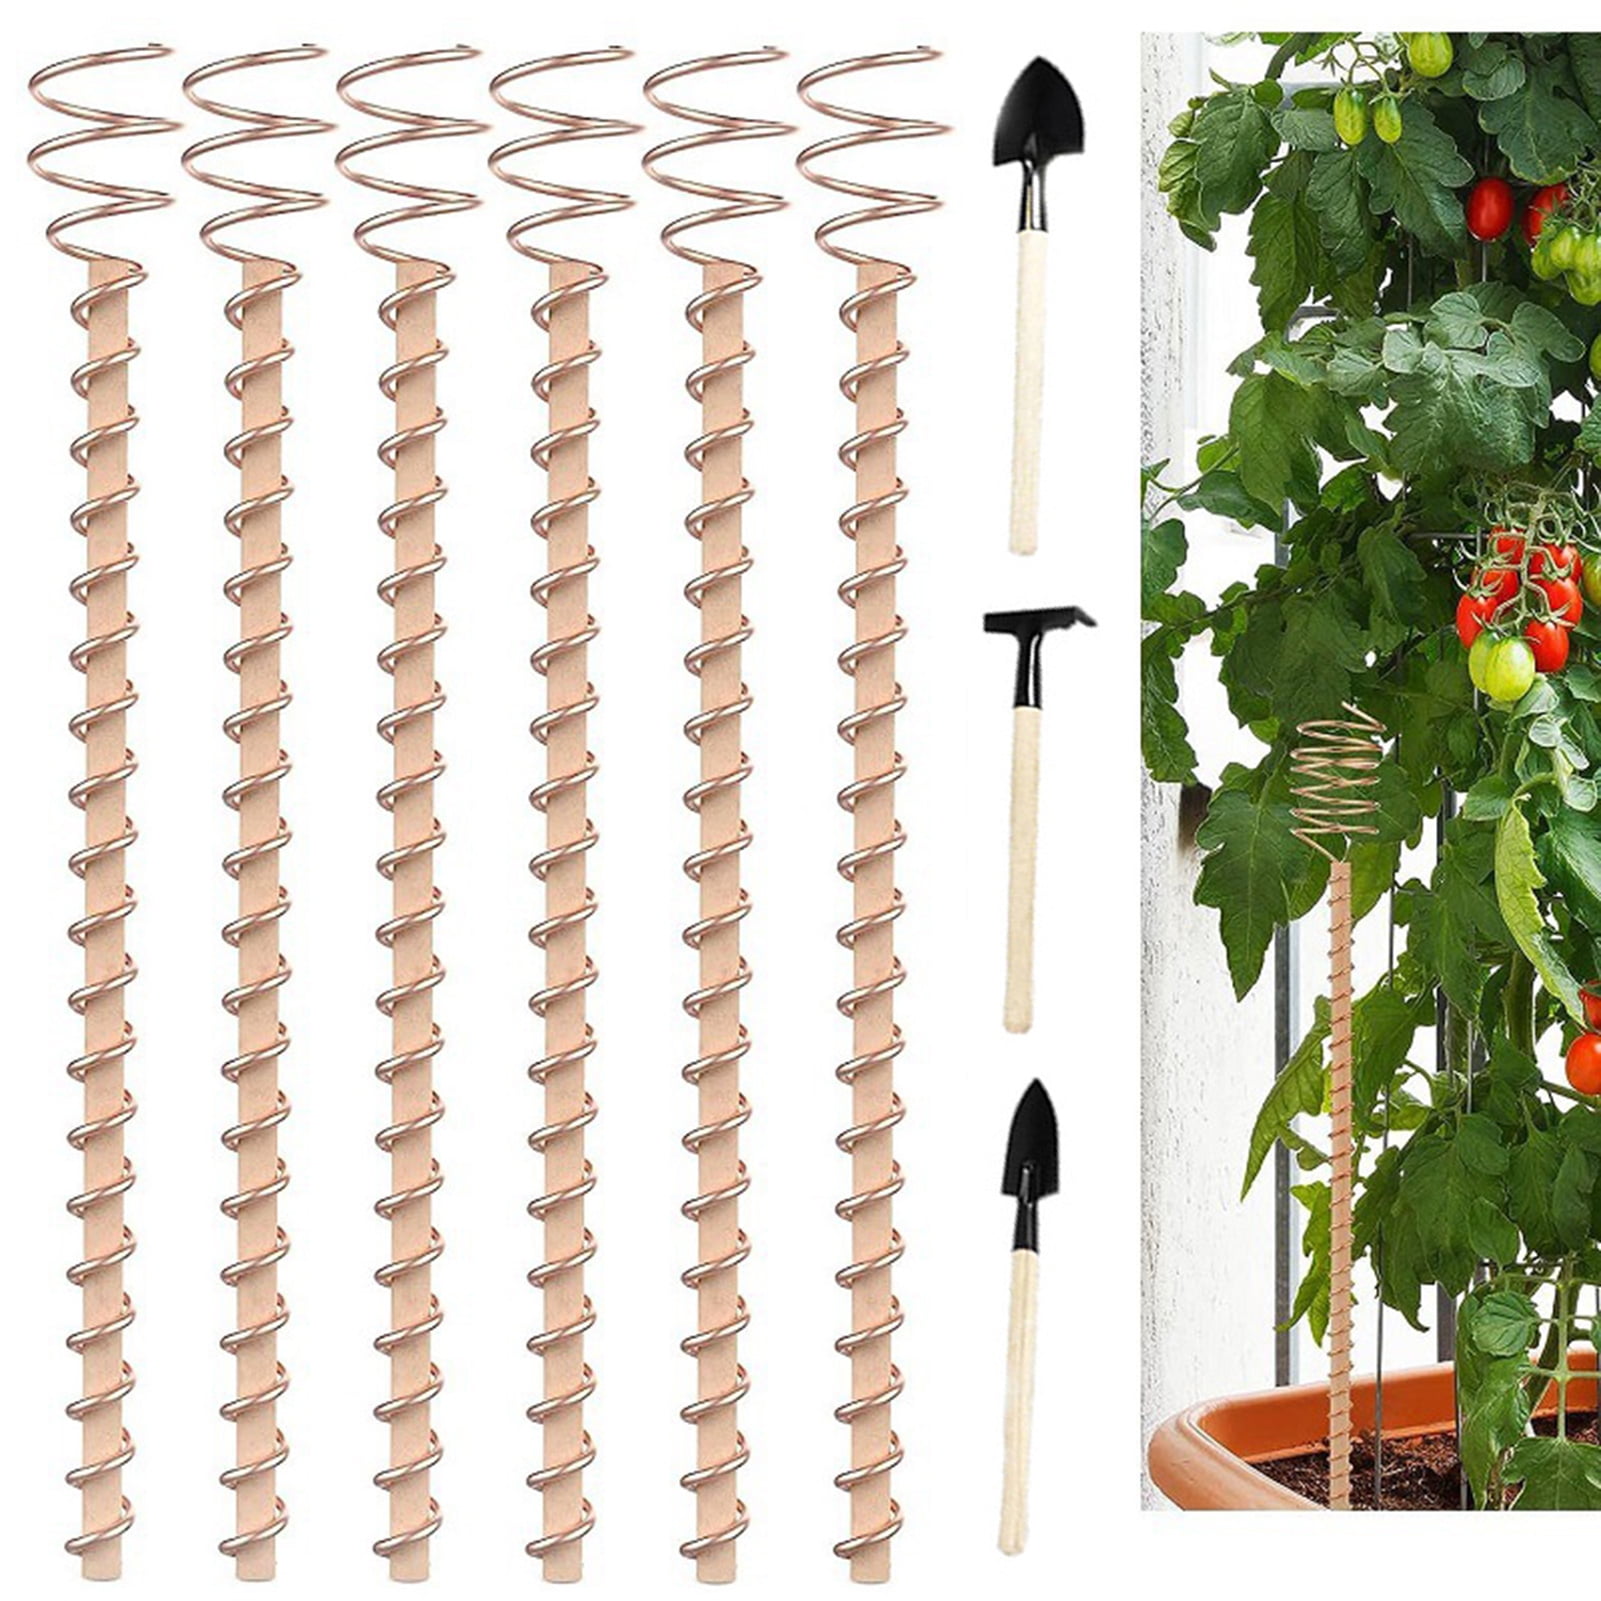 10 Pieces 11.8 Inch Electroculture Copper Wire Antenna Copper Rods for  Plants with 32.8 ft Copper Wire for Copper Garden Stakes Tools Outdoor  Plants